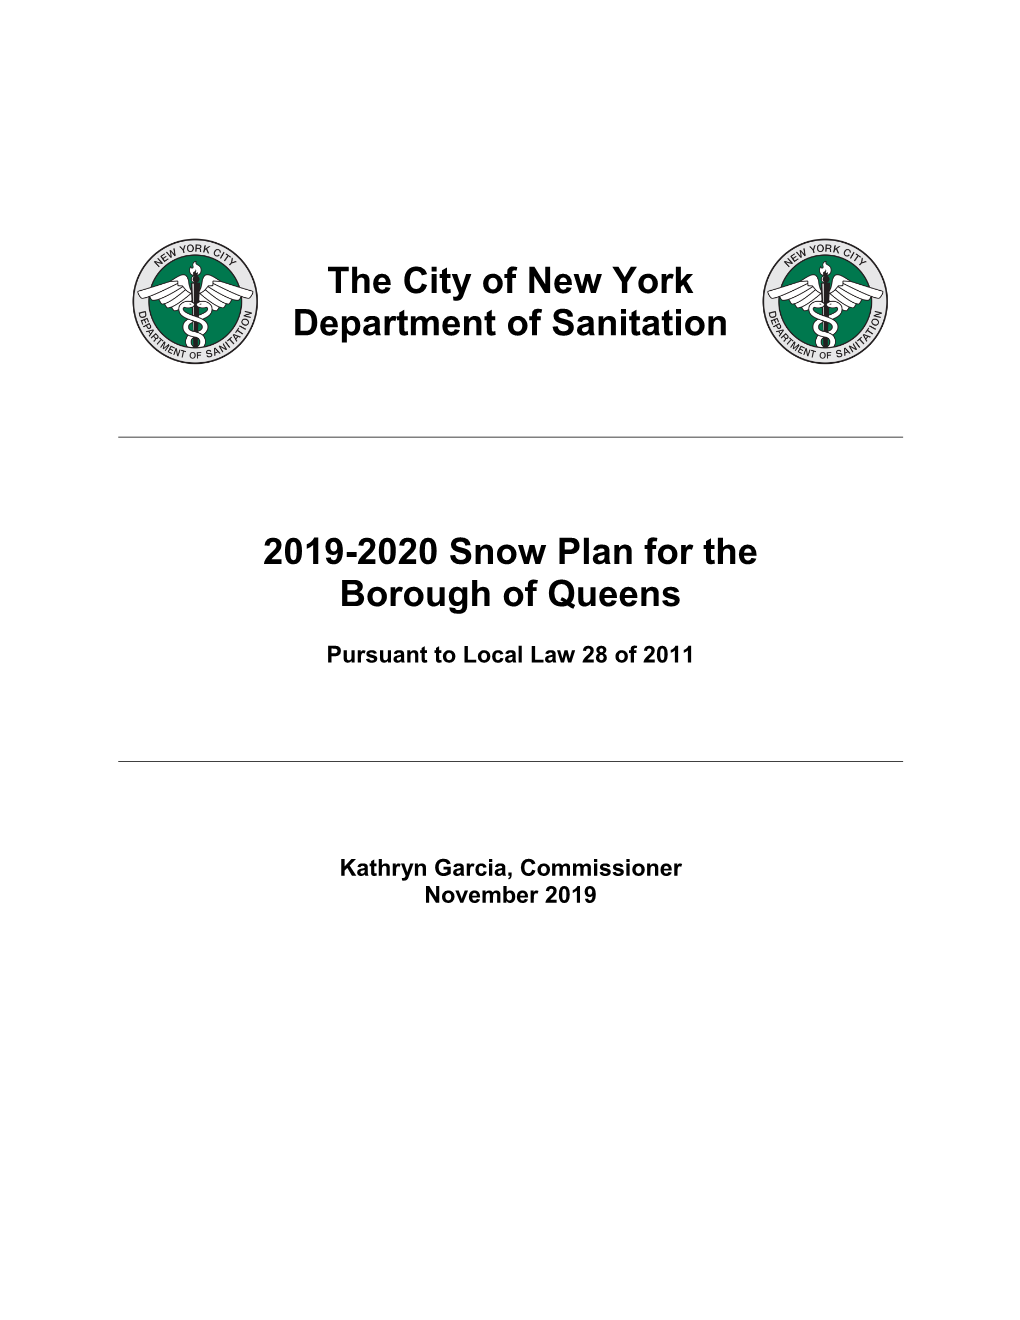 The City of New York Department of Sanitation 2019-2020 Snow Plan for the Borough of Queens